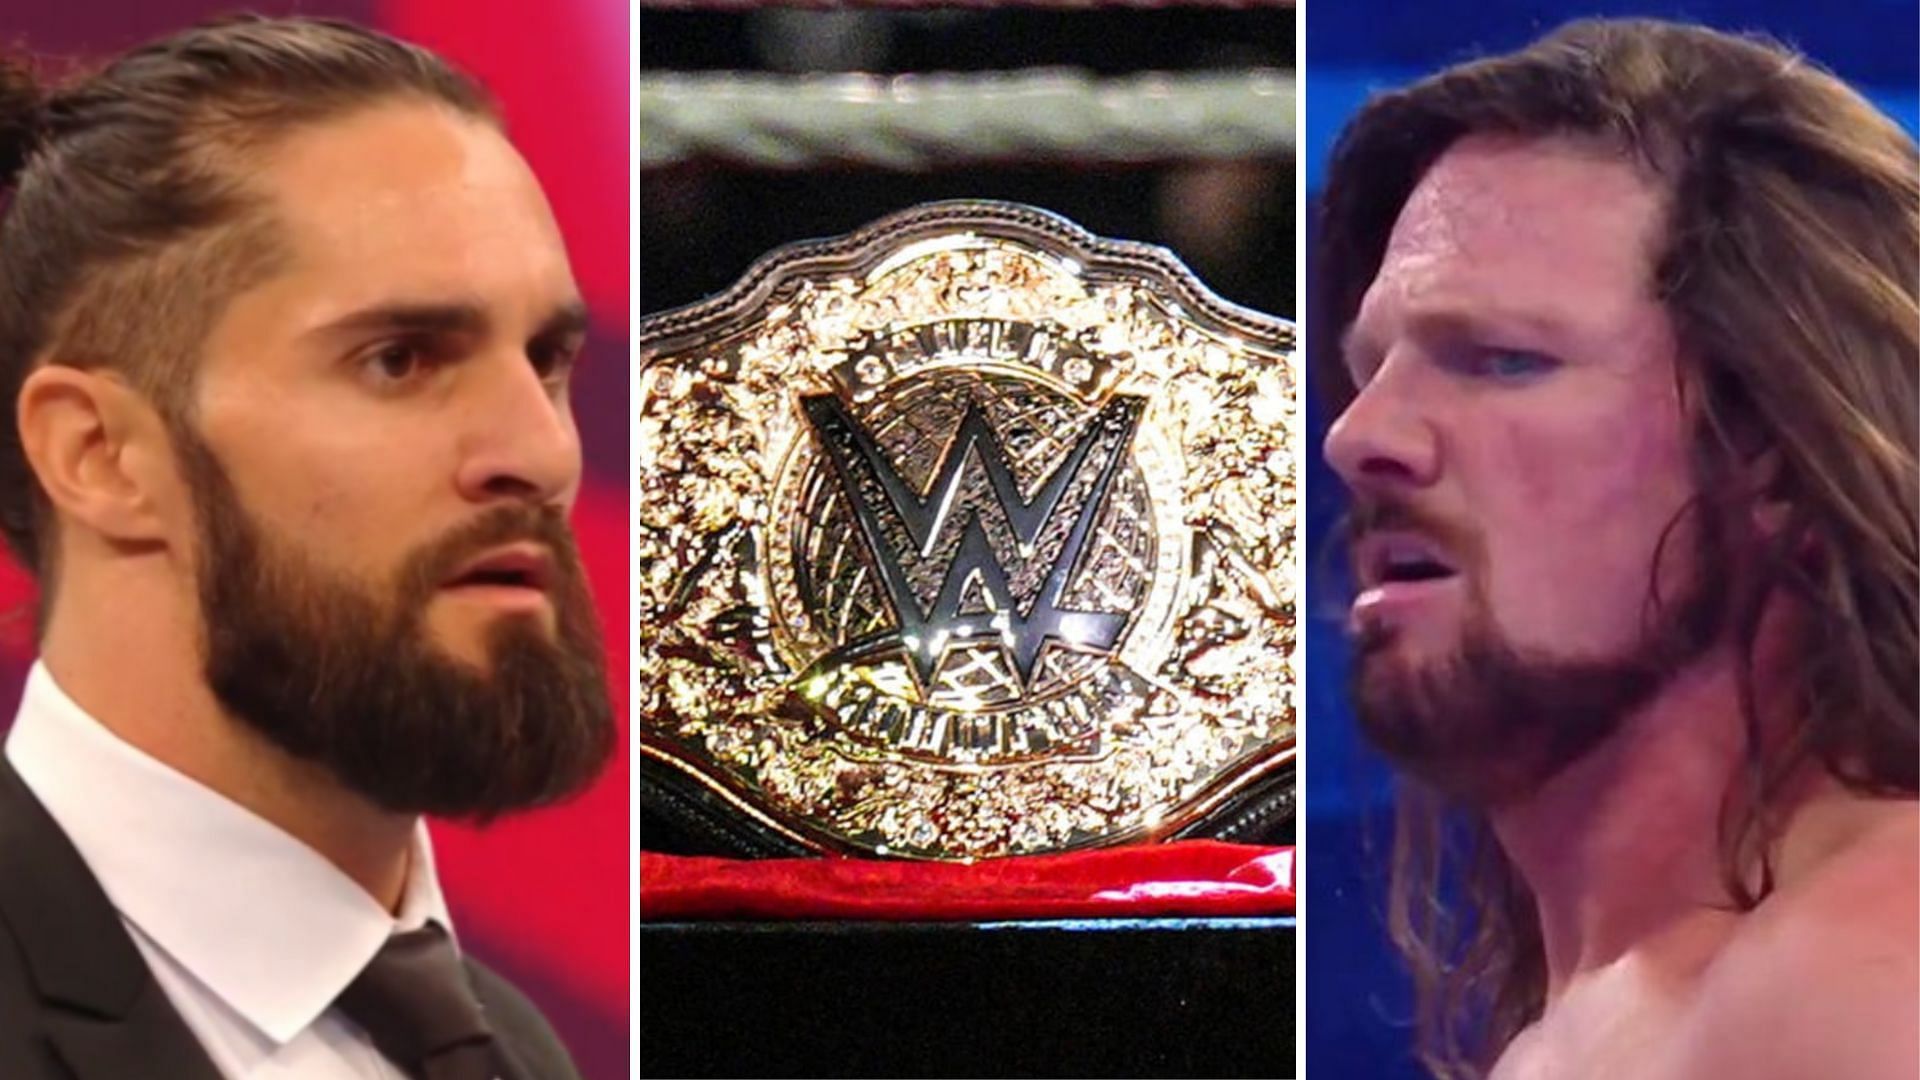 Seth Rollins and AJ Styles will battle to become the inaugural World Heavyweight Champion at Night of Champions!